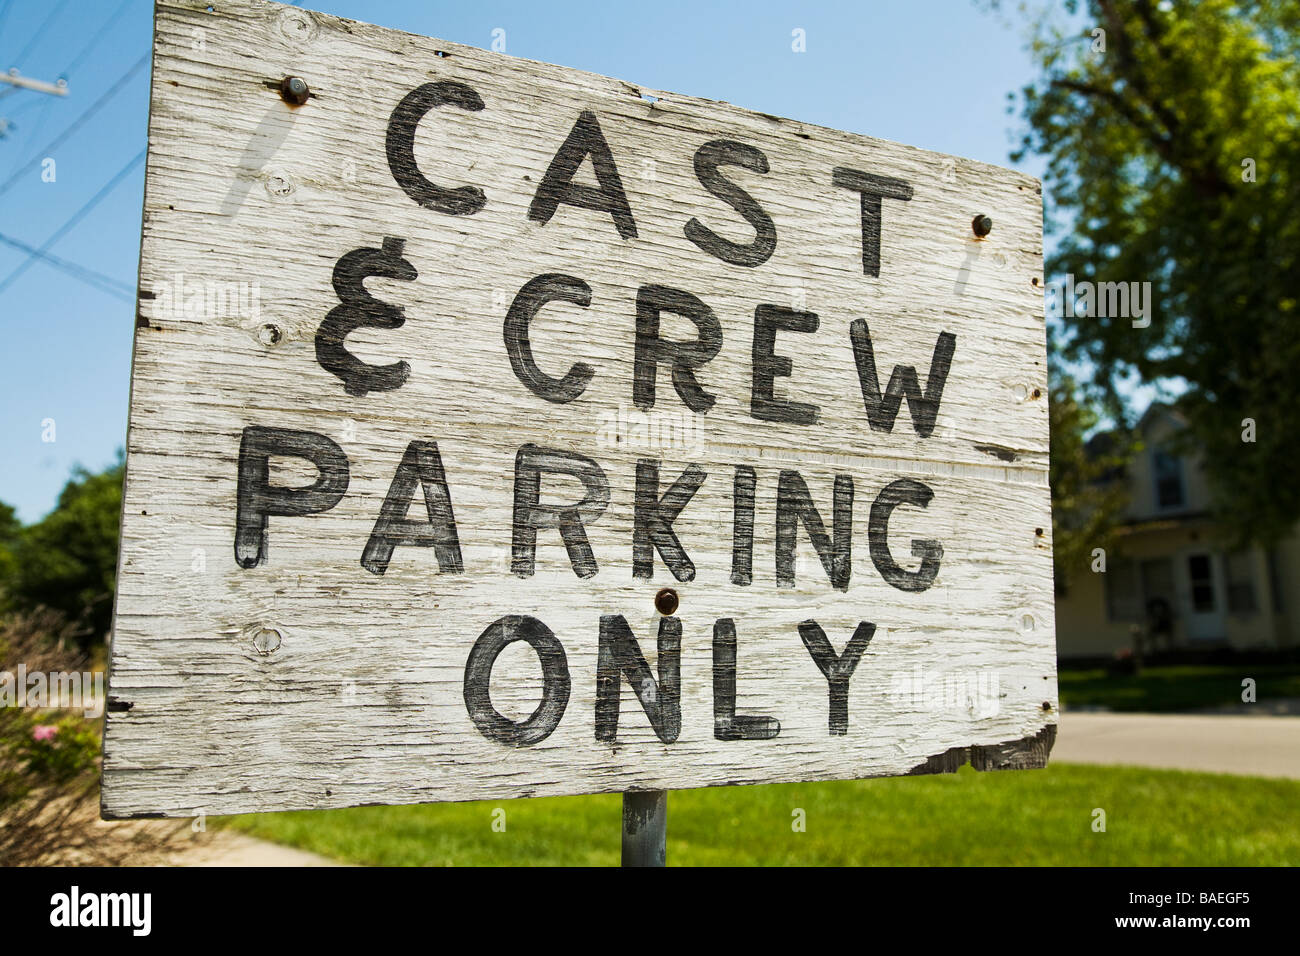 ILLINOIS DeKalb Cast and crew parking only sign painted on wood outside community theater Stock Photo